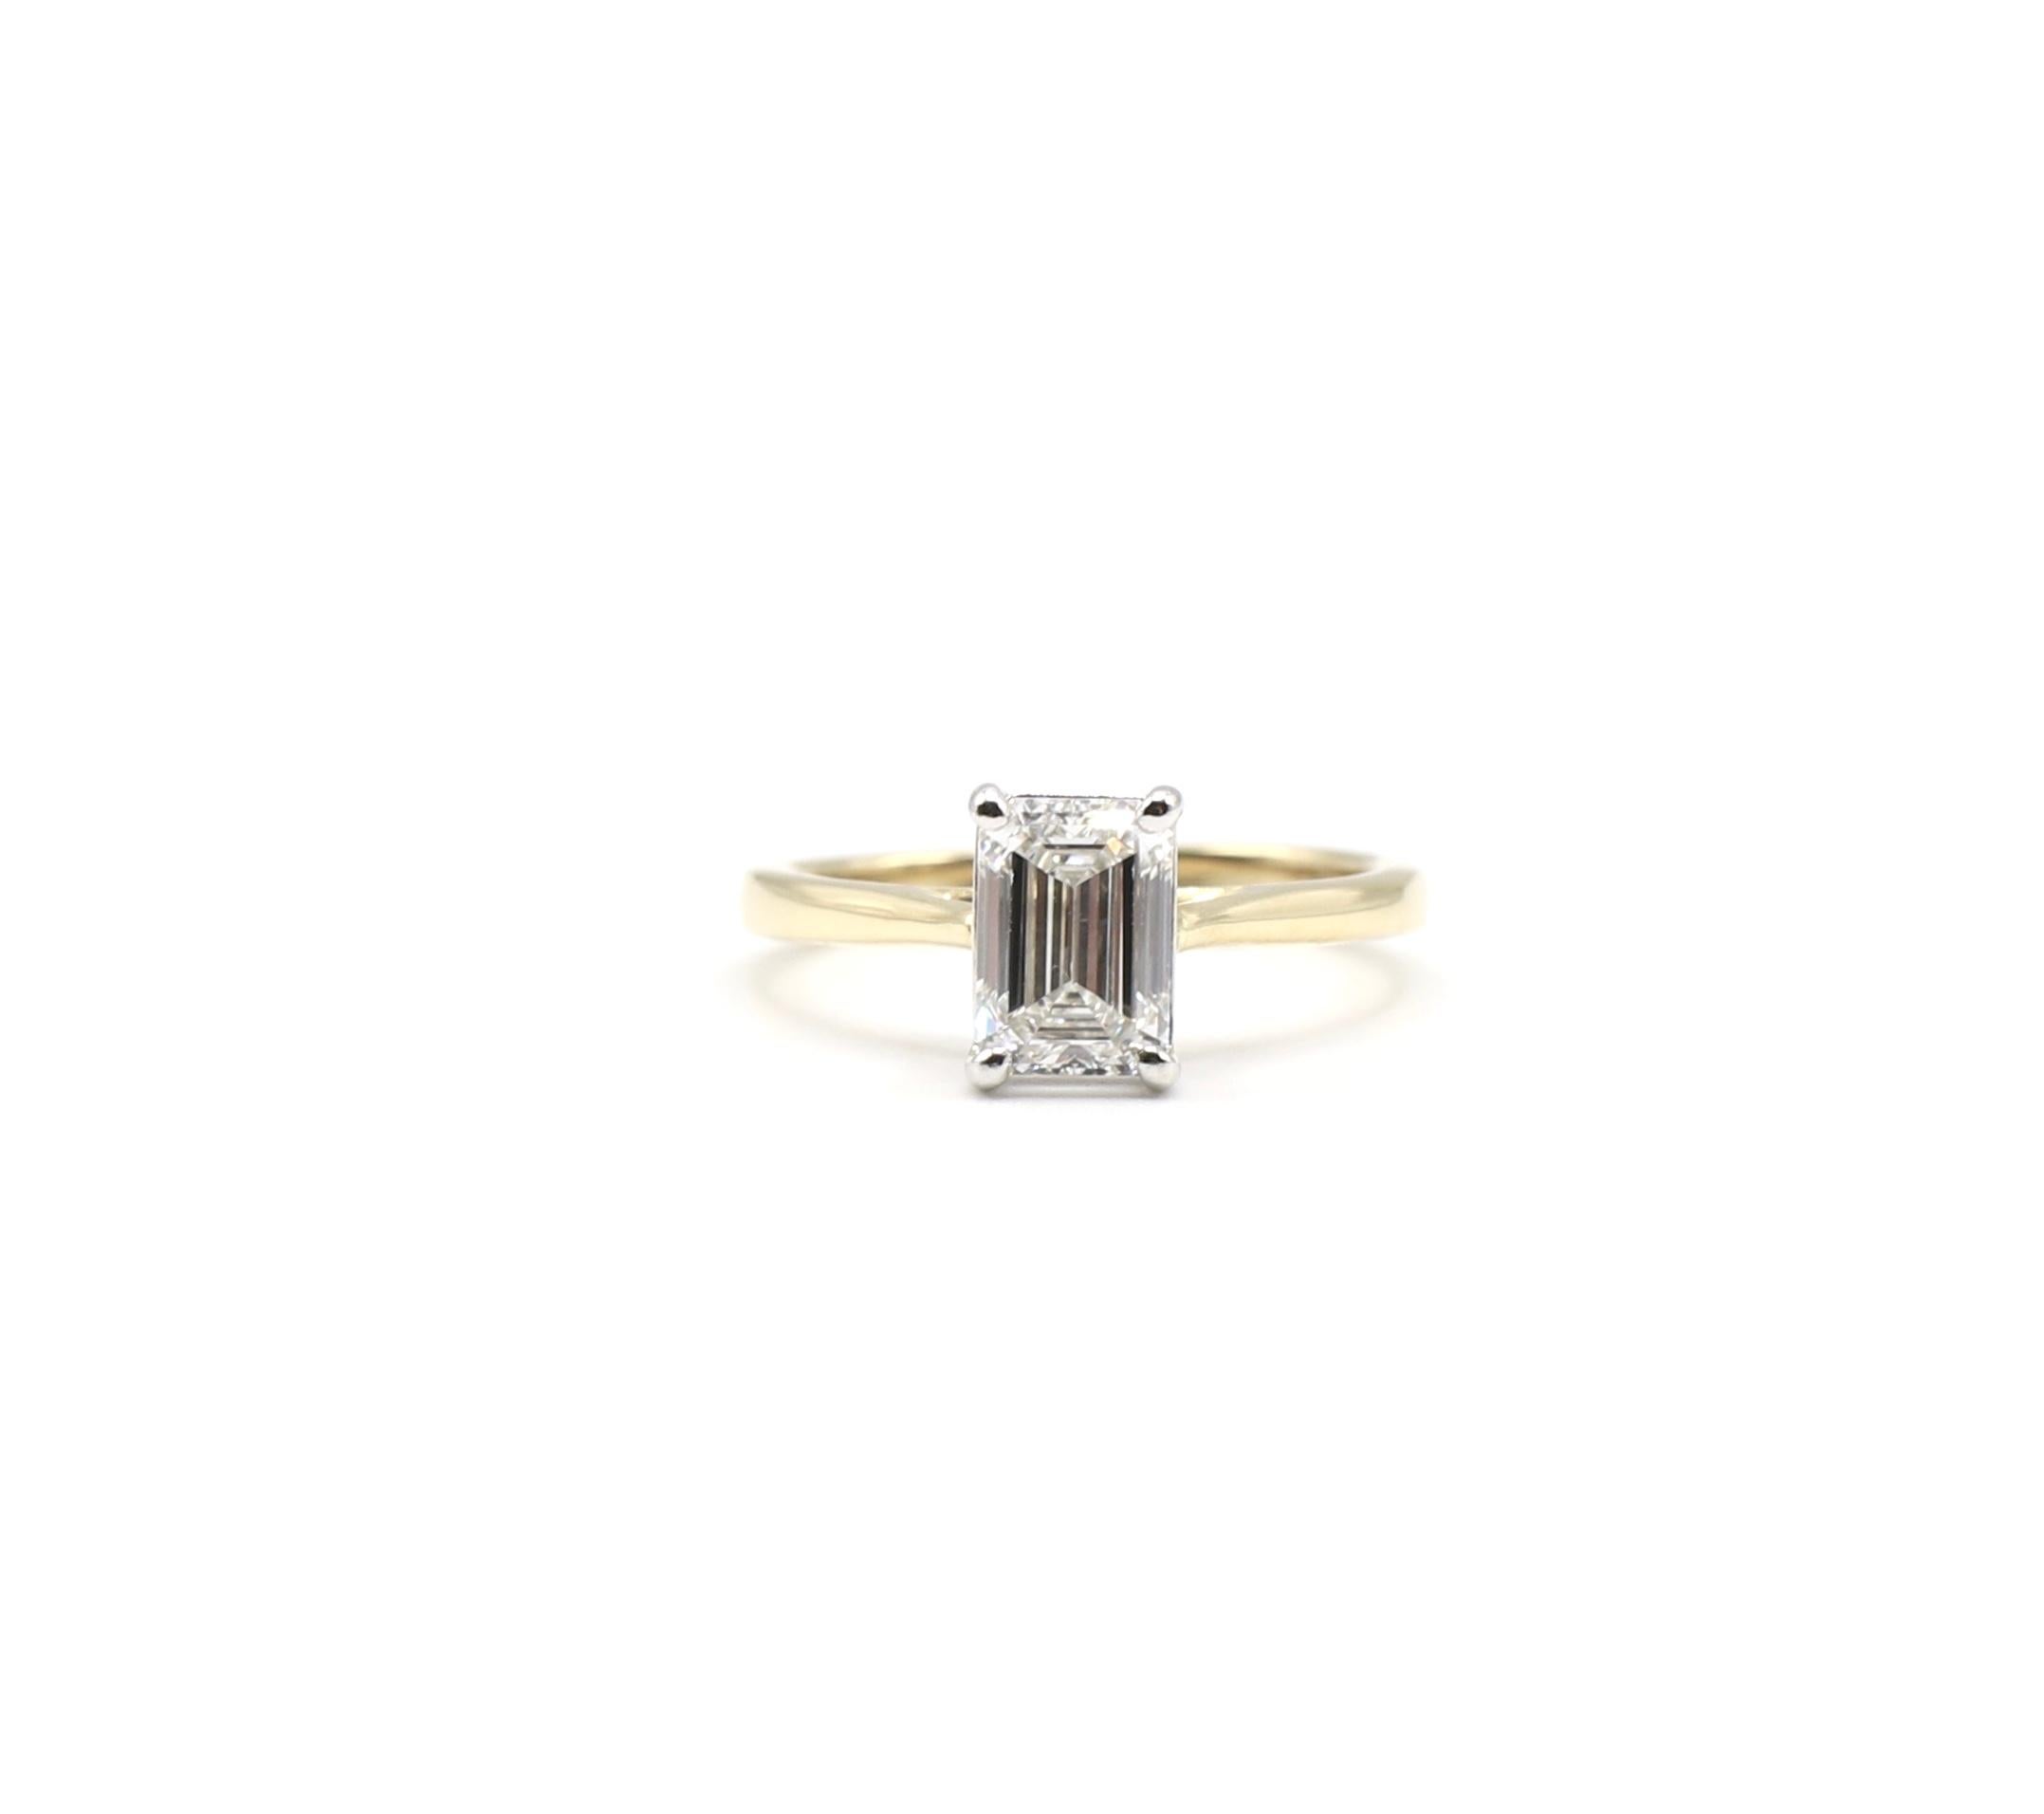 GIA Certified Emerald Cut 1.01ct G VS2 Diamond Solitaire Engagement Ring 14K Yellow Gold Size 4.25

GIA Report Number: 1149418646 (please note original GIA report pictured for details)
Shape: Emerald Cut
Carat weight: 1.01 ct
Color: G
Clarity: